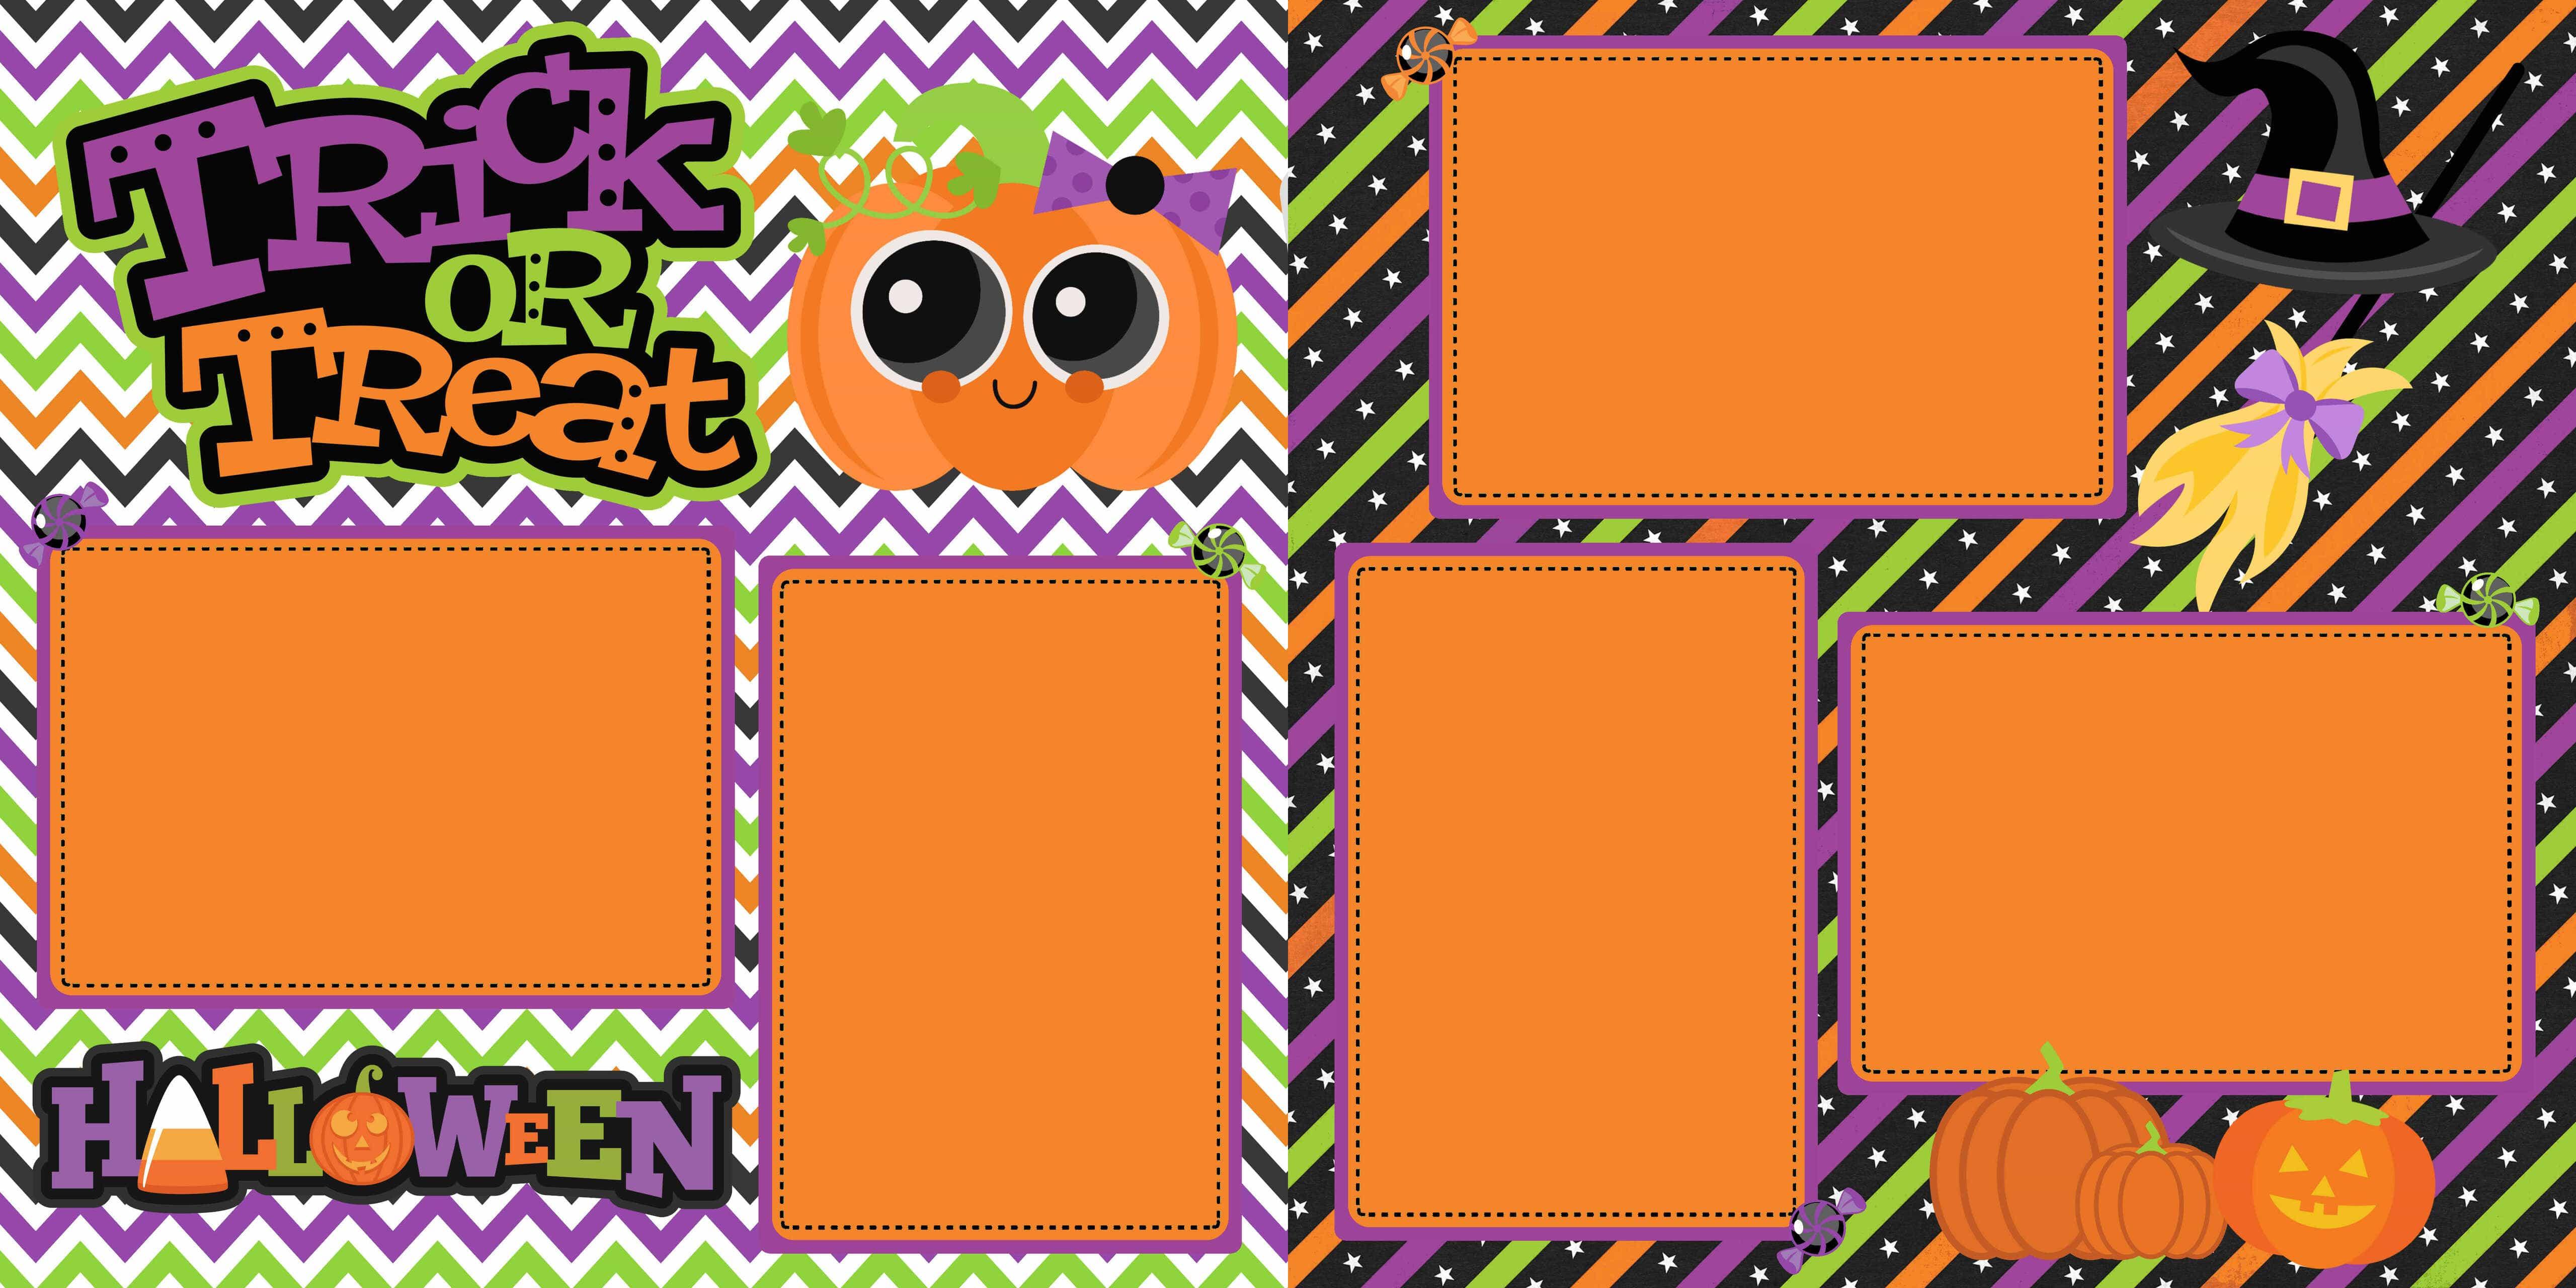 Trick Or Treat Halloween (2) - 12 x 12 Premade, Printed Scrapbook Pages by SSC Designs